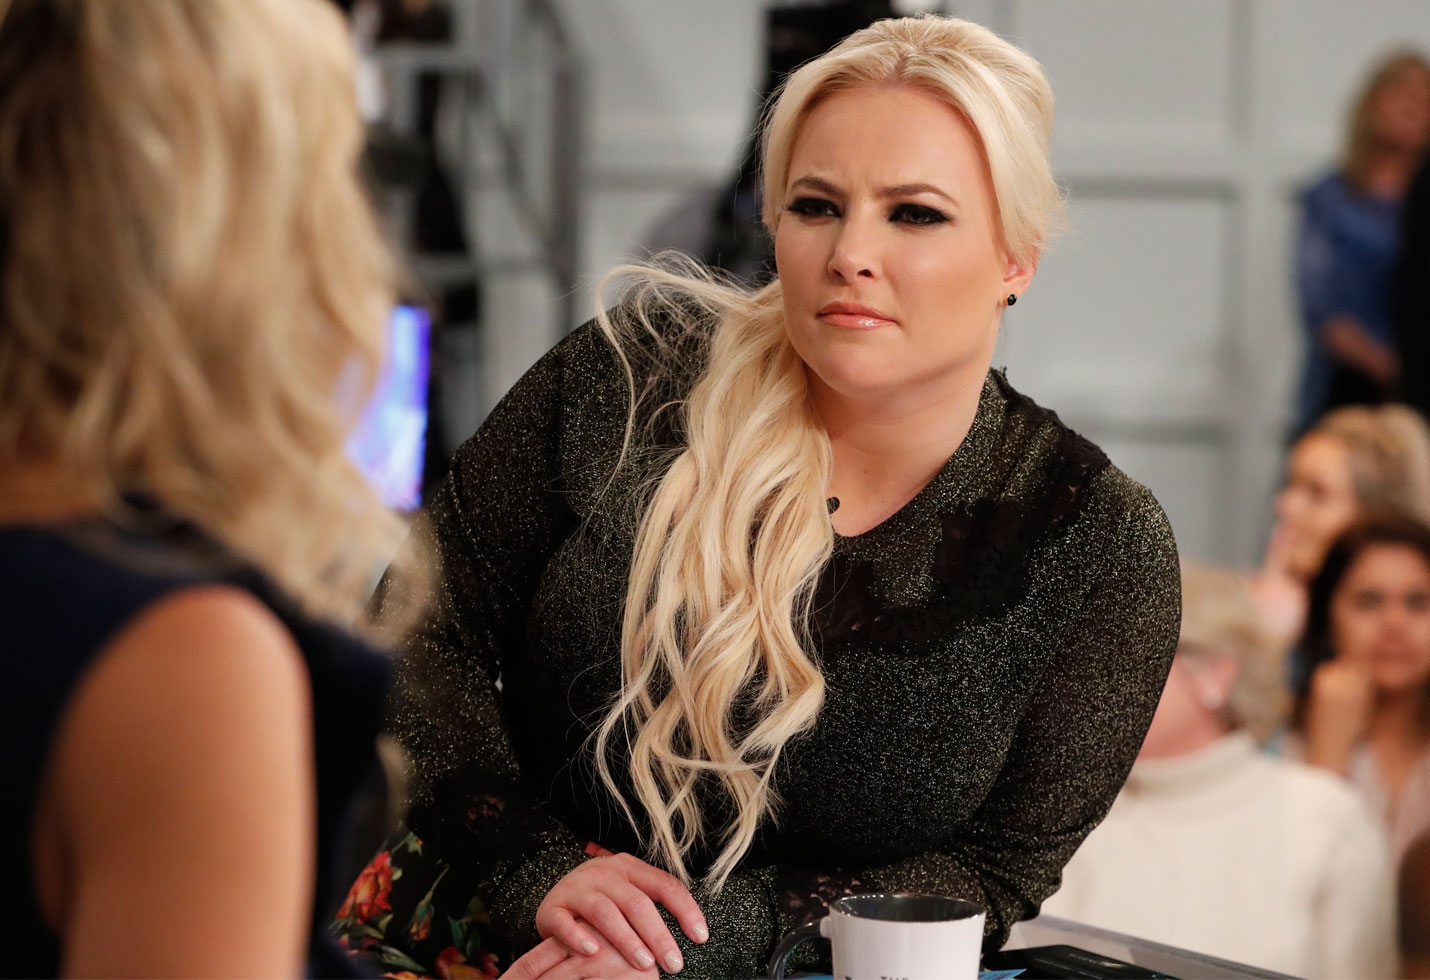 Say hello to your new clapback courtesy of meghan mccain. 